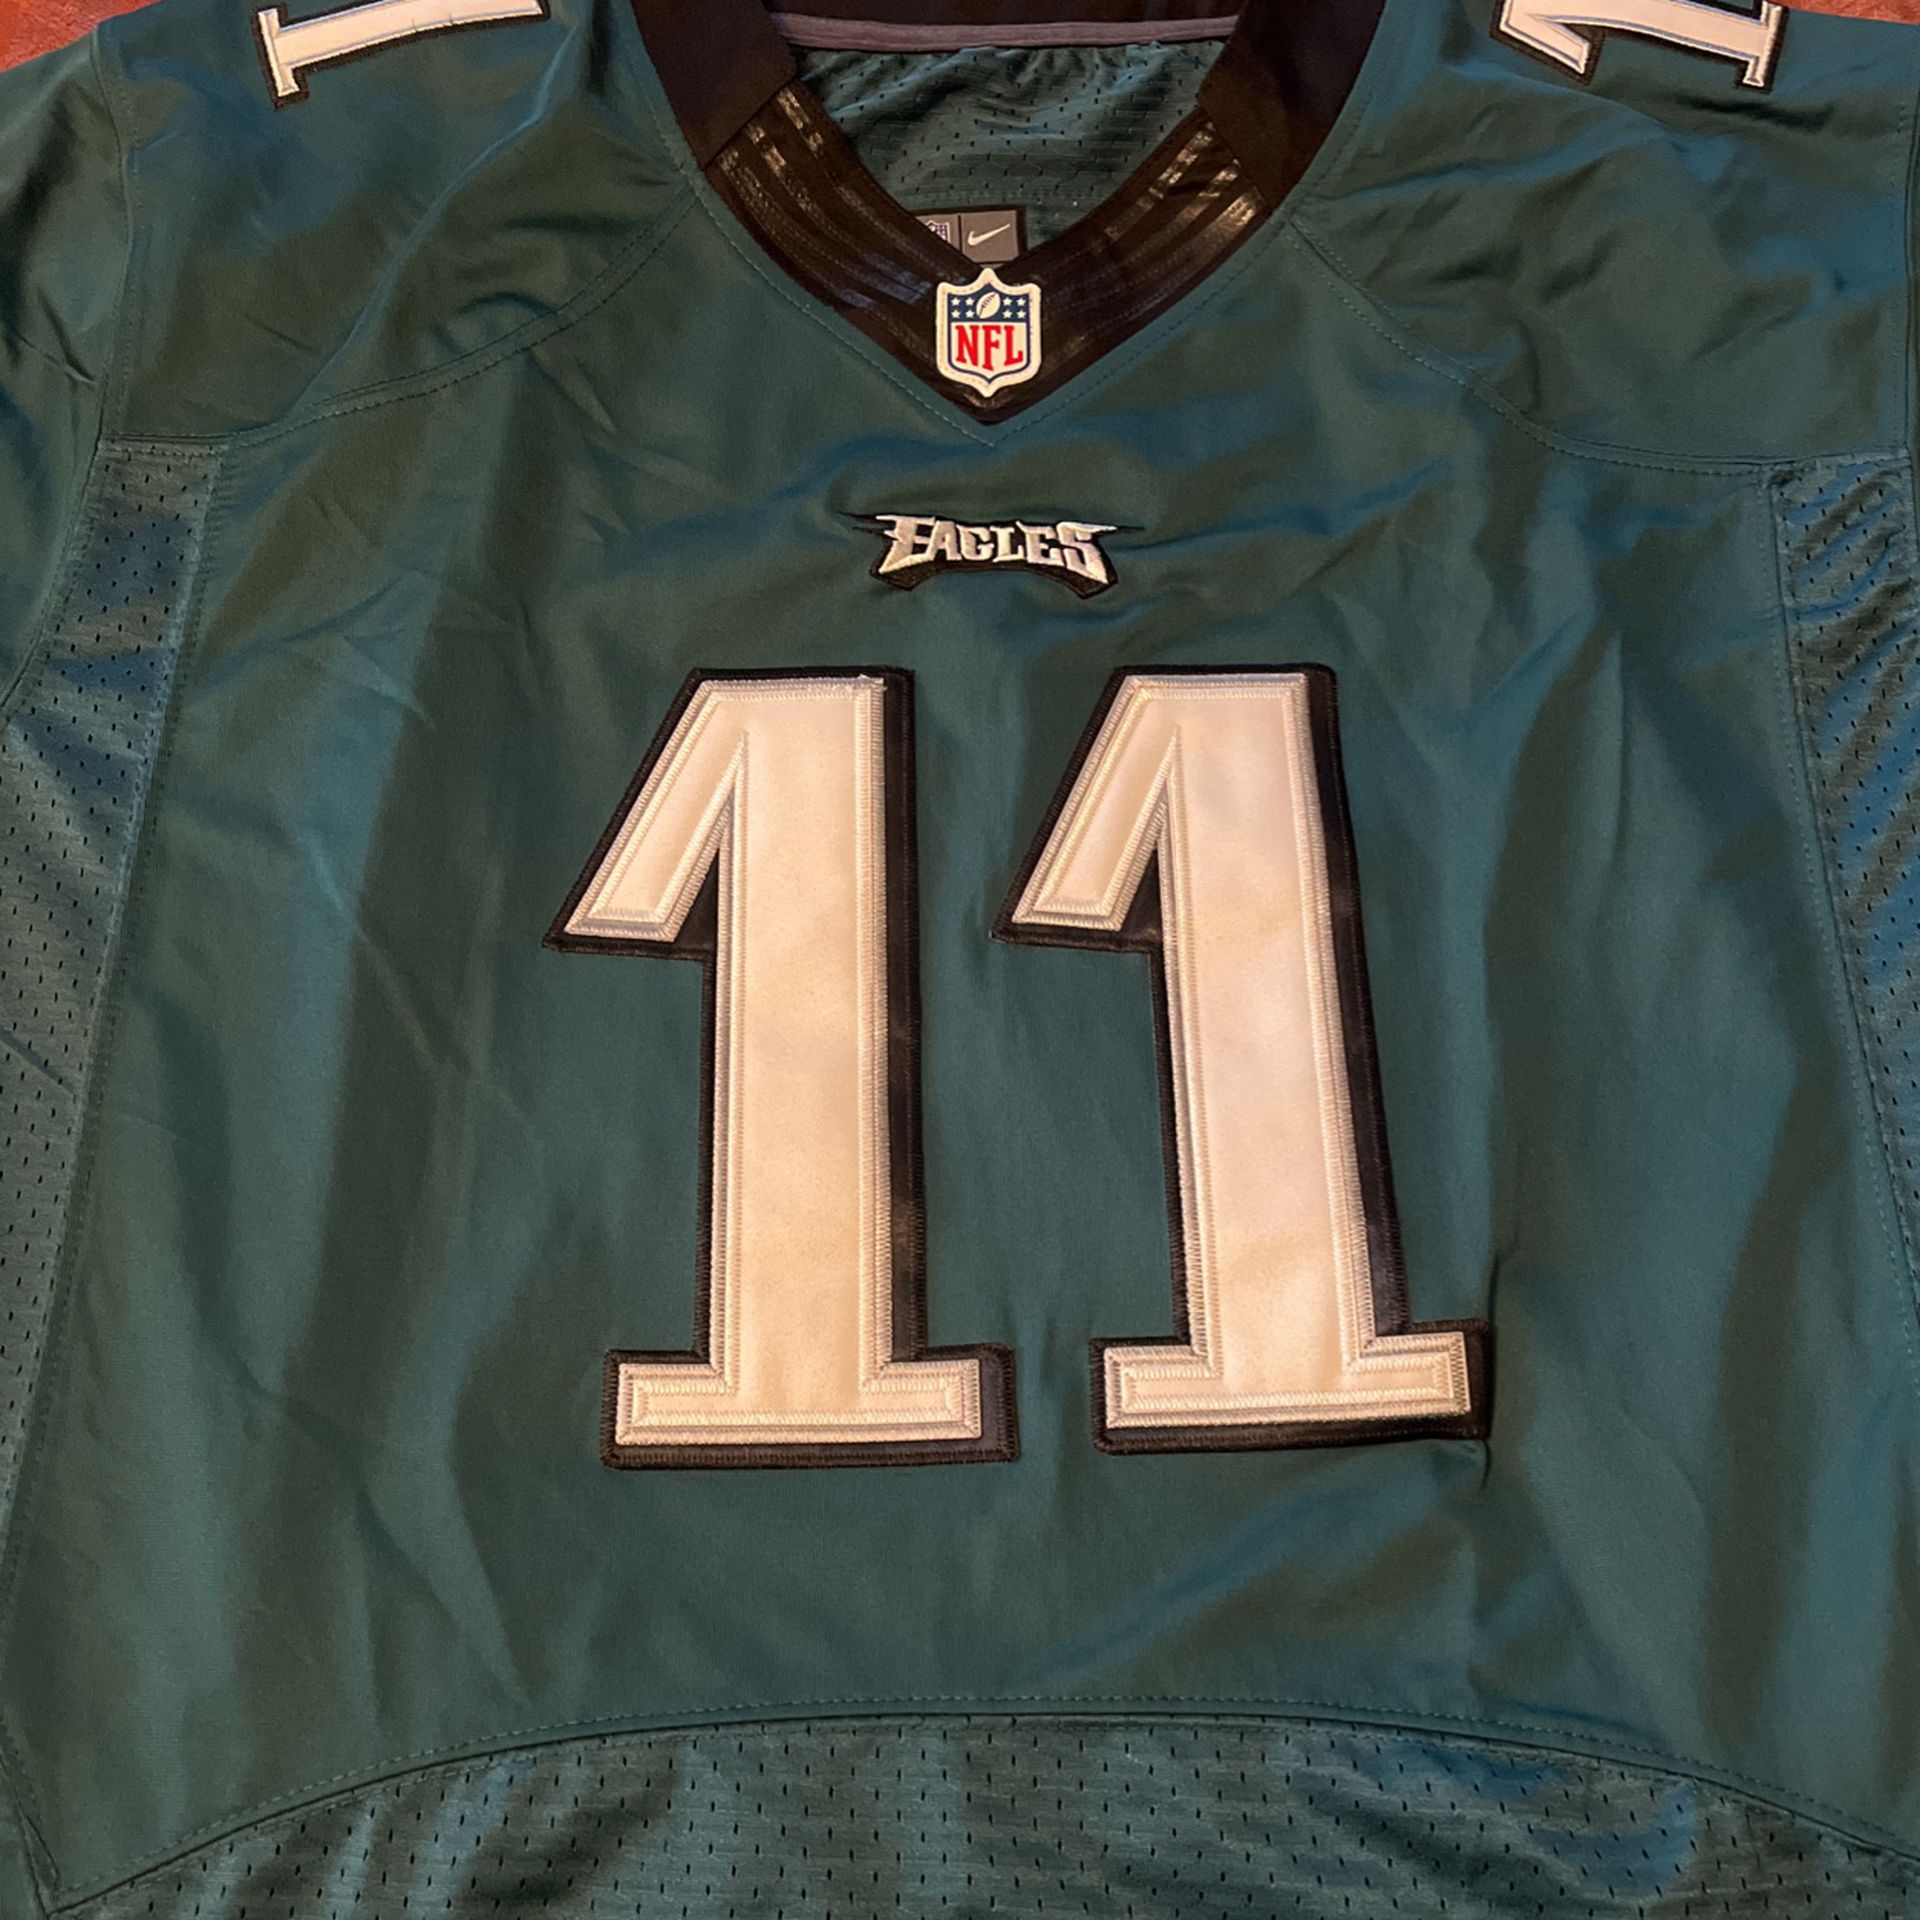 eagles jersey used